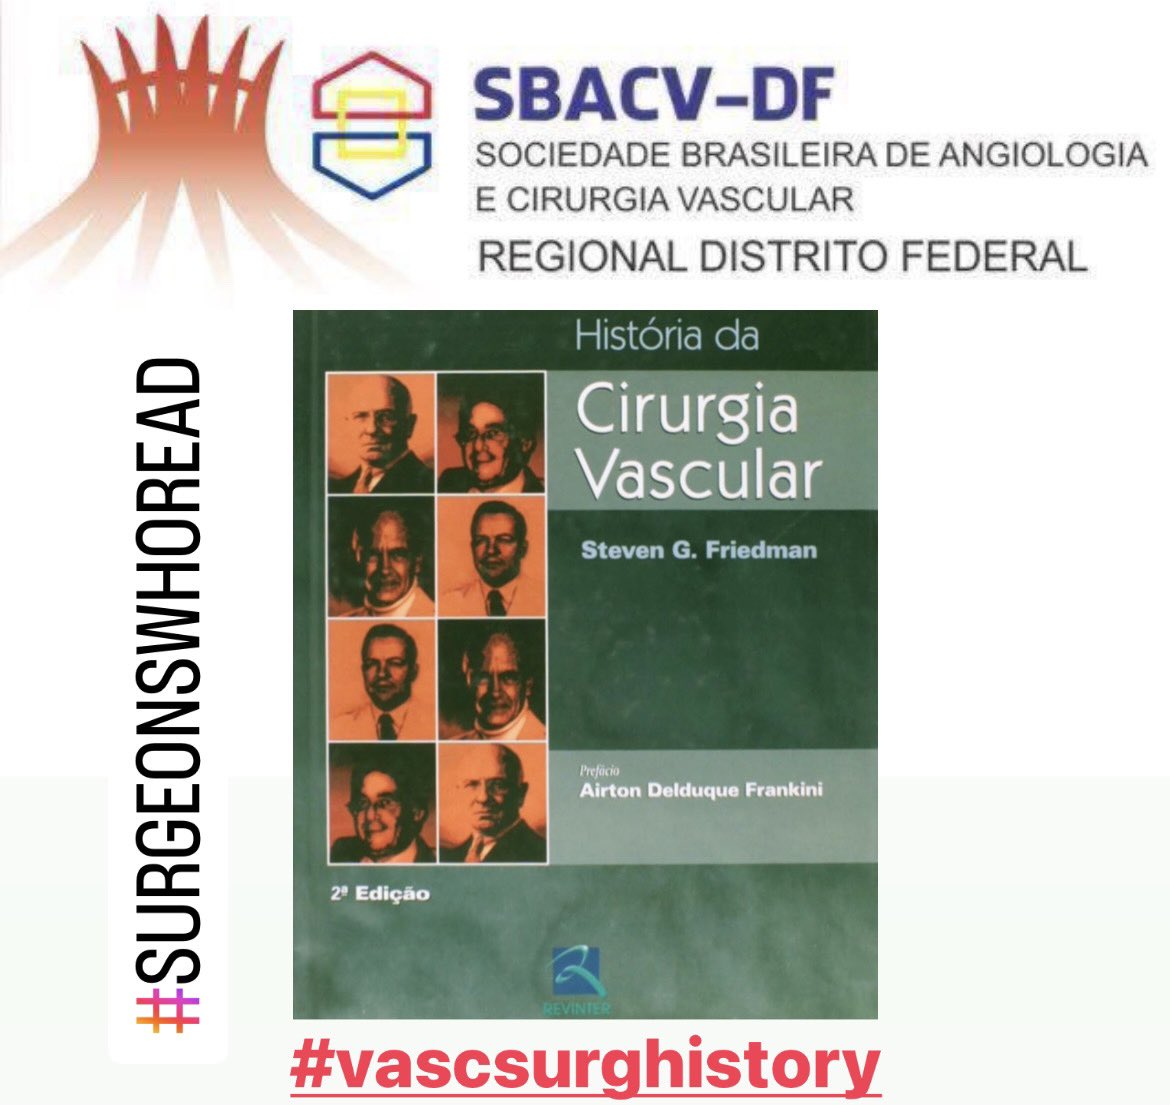 In its 2o Ed., provides the reader with a broad review of the main topics related to the evolution of #vascsurgery, highlighting achievements and authors… learn about the subject in focus and a little more about the lives and motivation of its creators.
 a.co/d/jm5kzBd